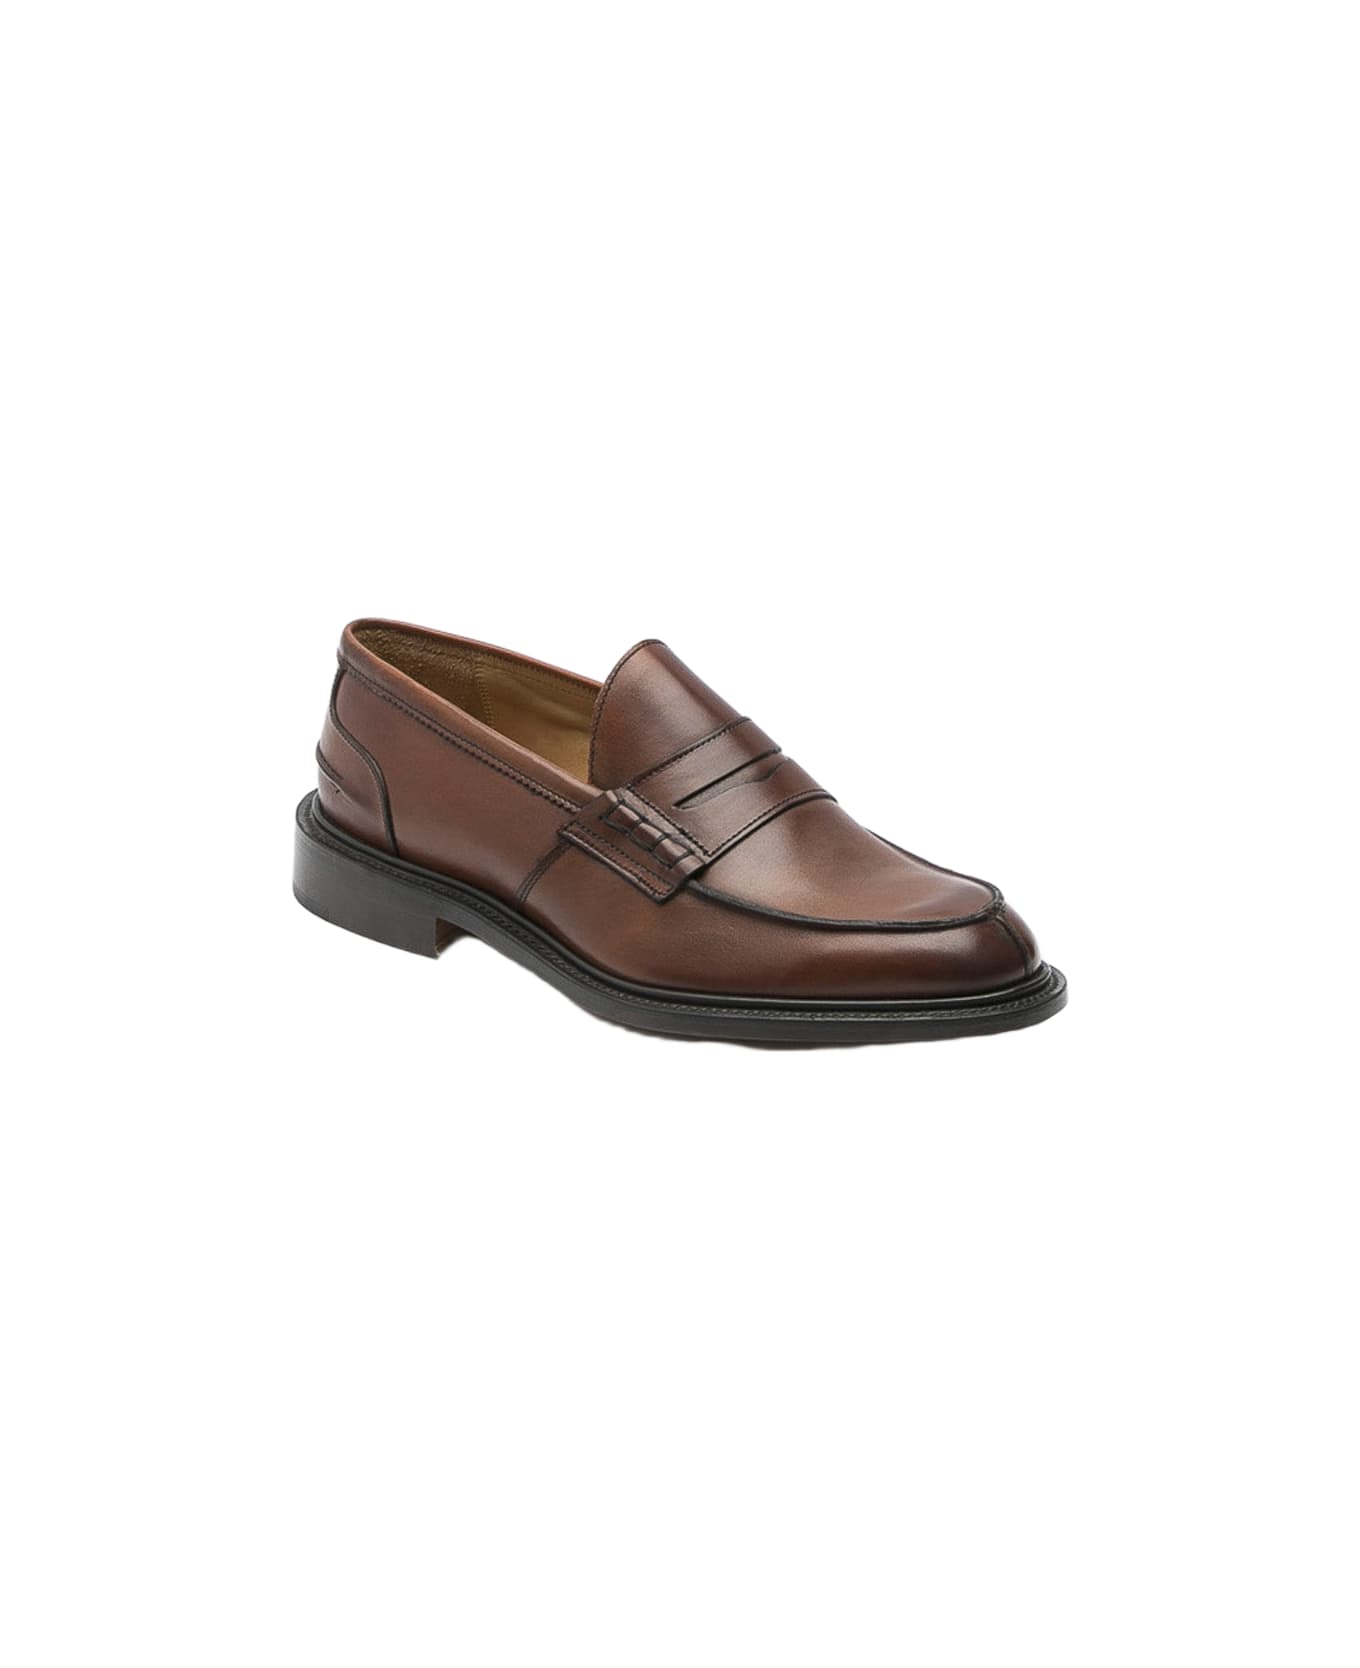 Tricker's James Chestnut Burnished Calf Penny Loafer - Marrone ローファー＆デッキシューズ